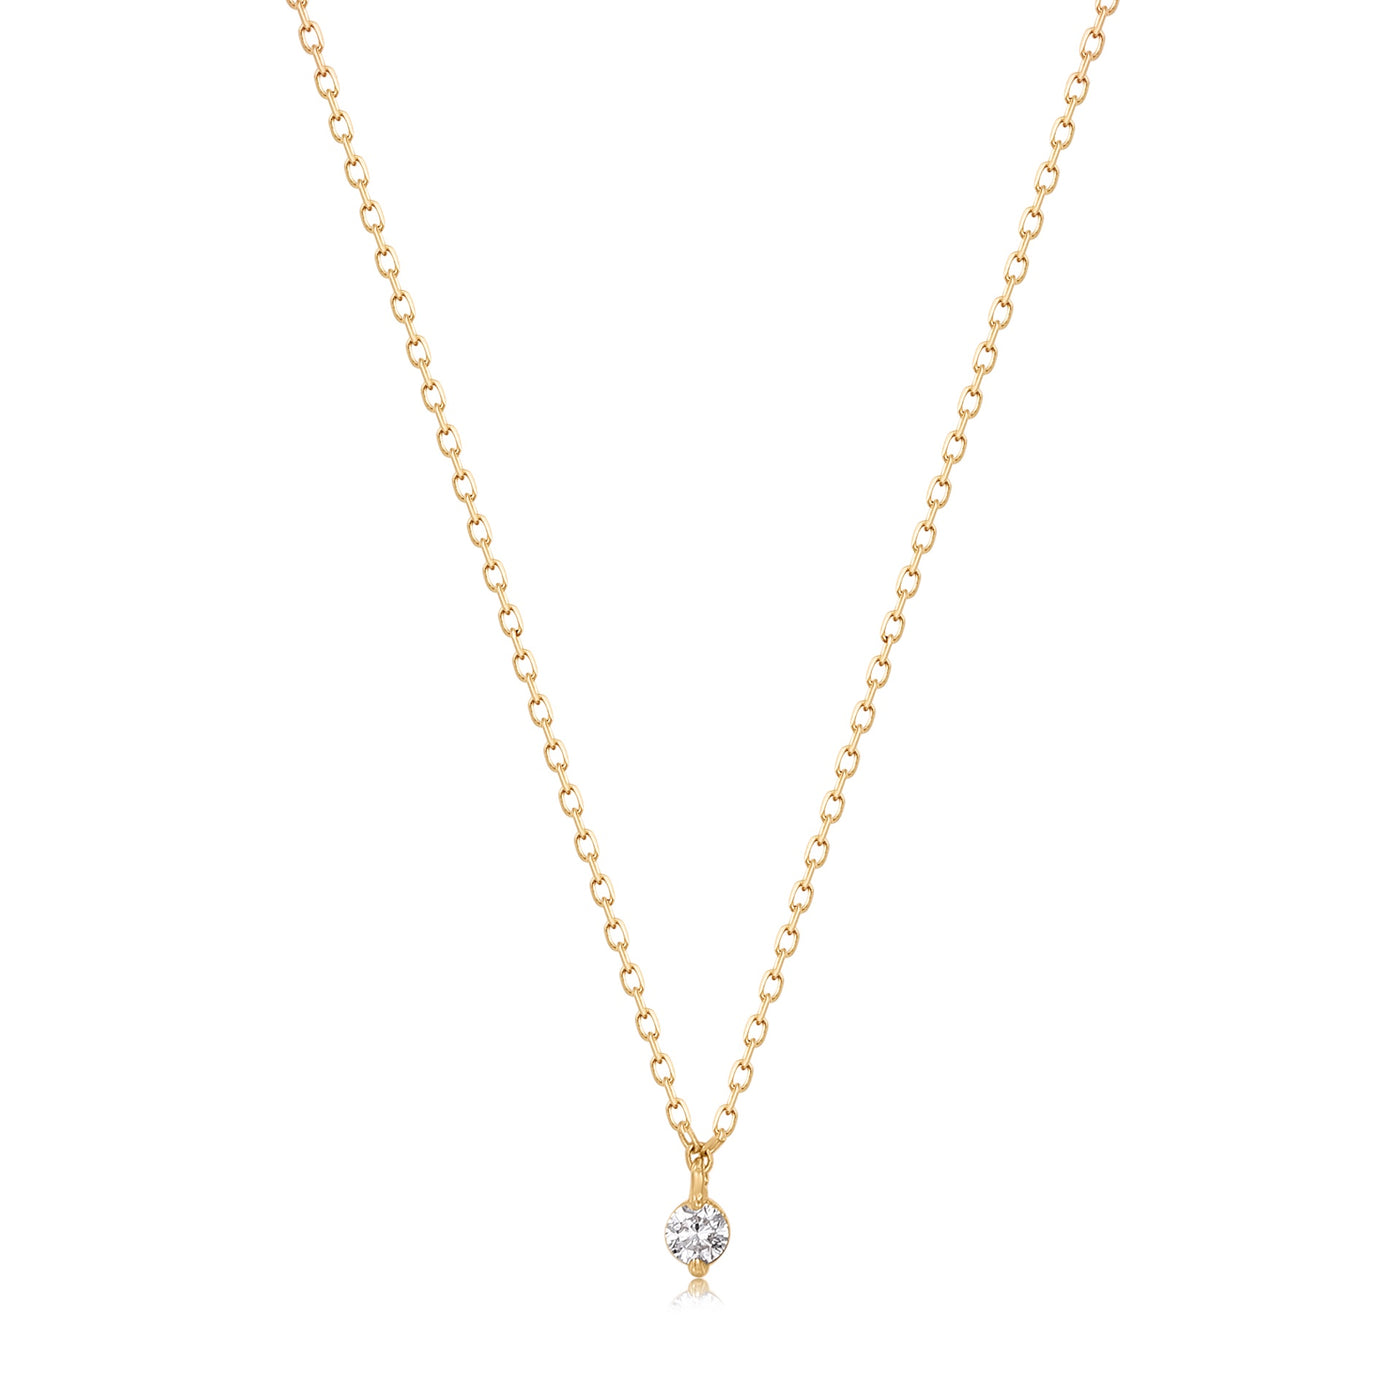 ESME | Floating Diamond Solitaire Necklace